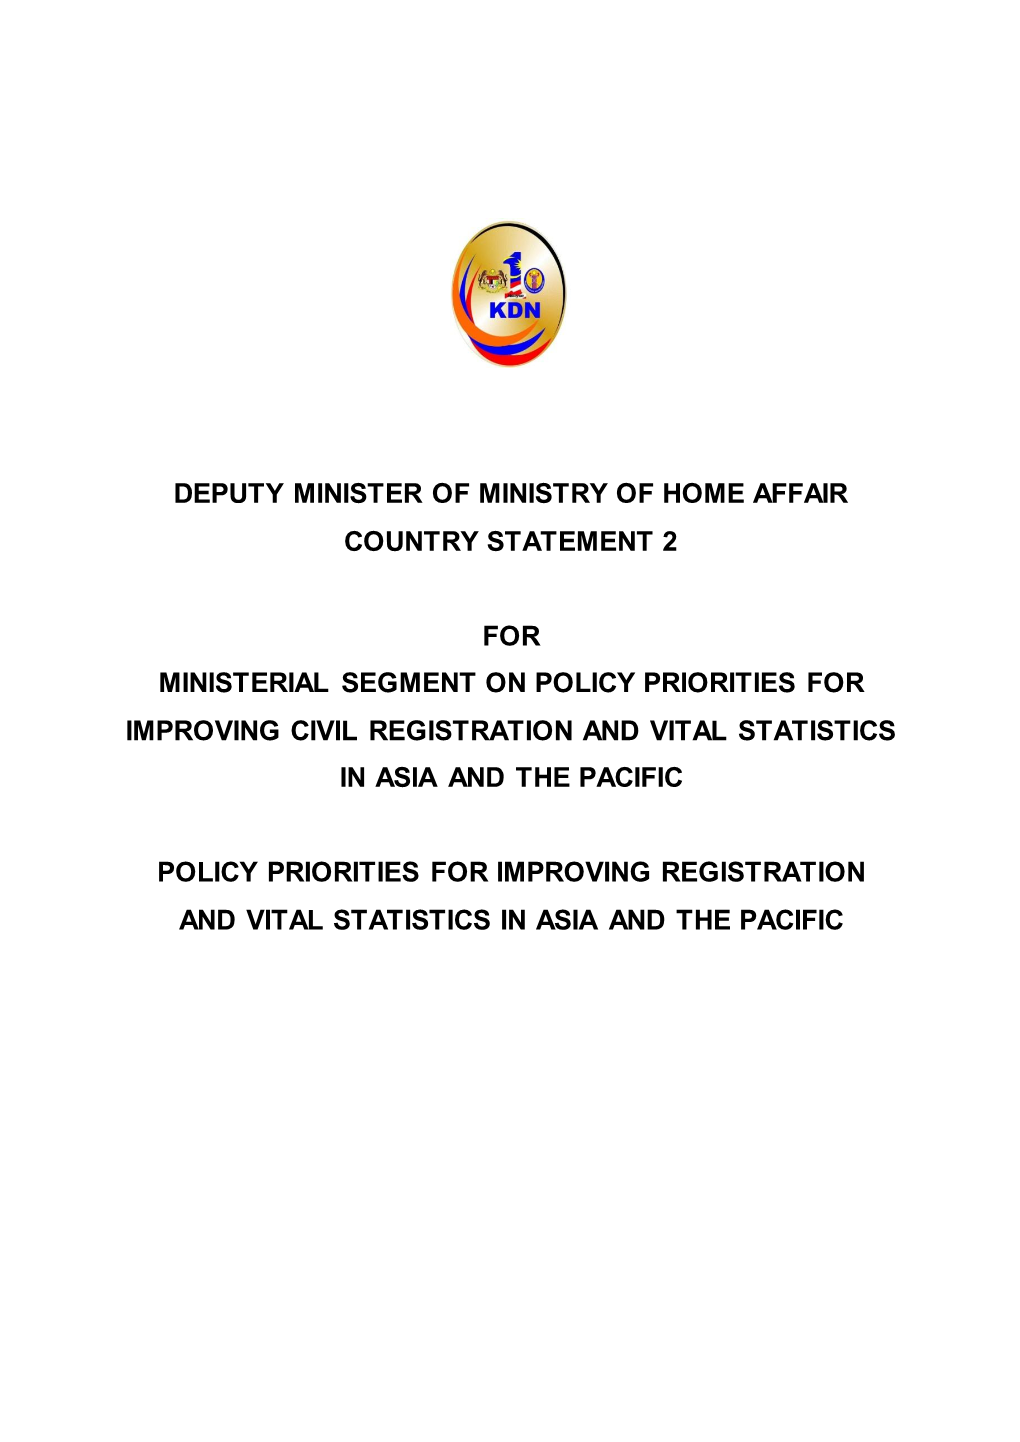 Deputy Minister of Ministry of Home Affair Country Statement 2 for Ministerial Segment on Policy Priorities for Improving Civil